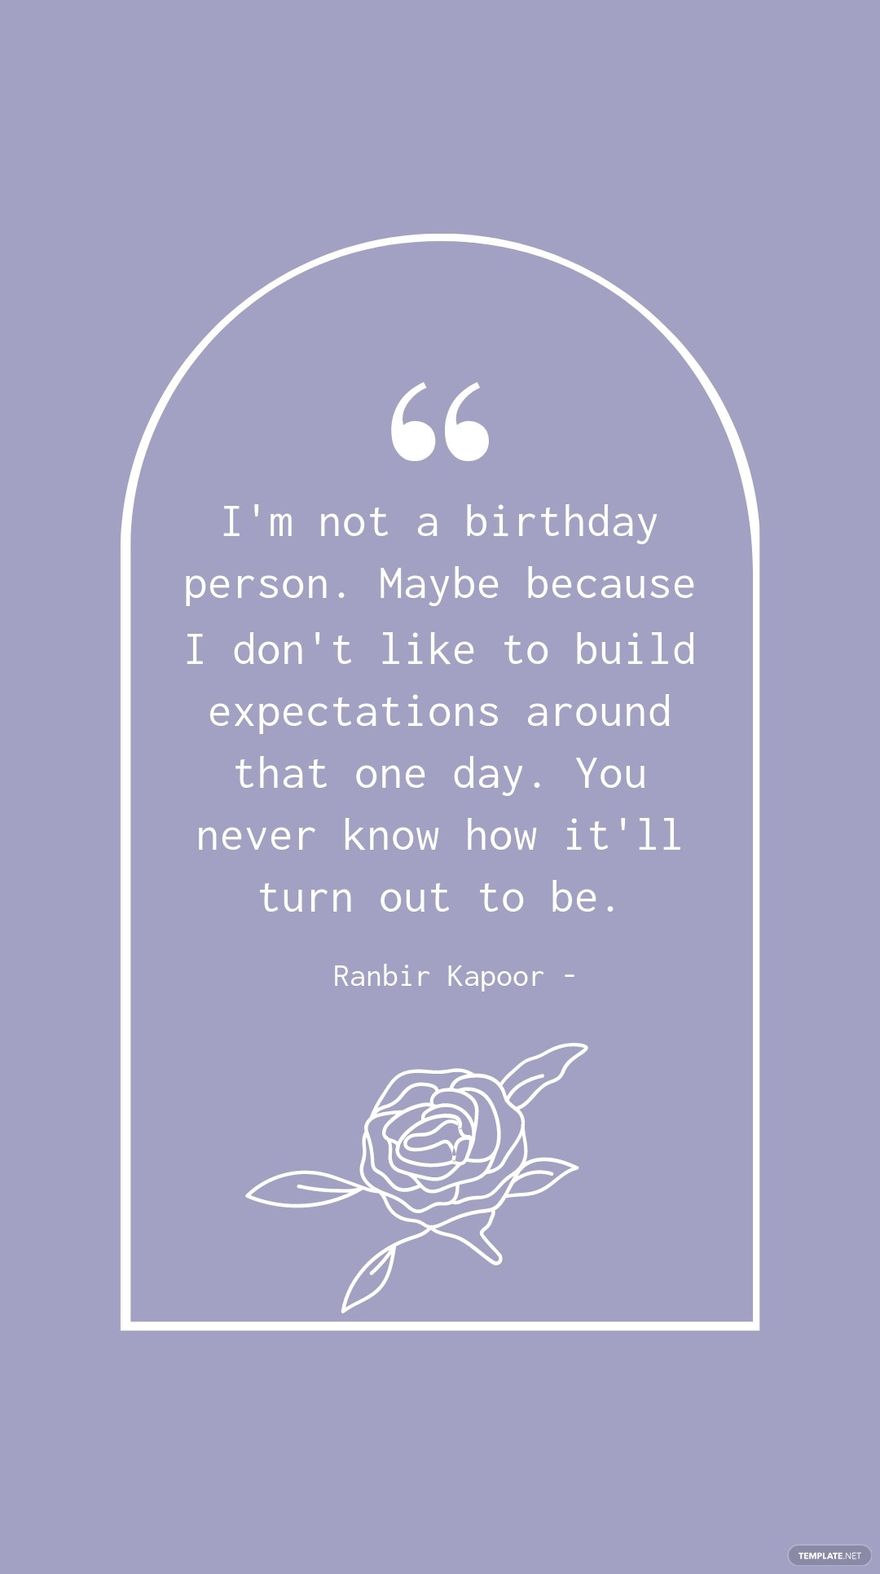 Ranbir Kapoor - I'm not a birthday person. Maybe because I don't like to build expectations around that one day. You never know how it'll turn out to be.